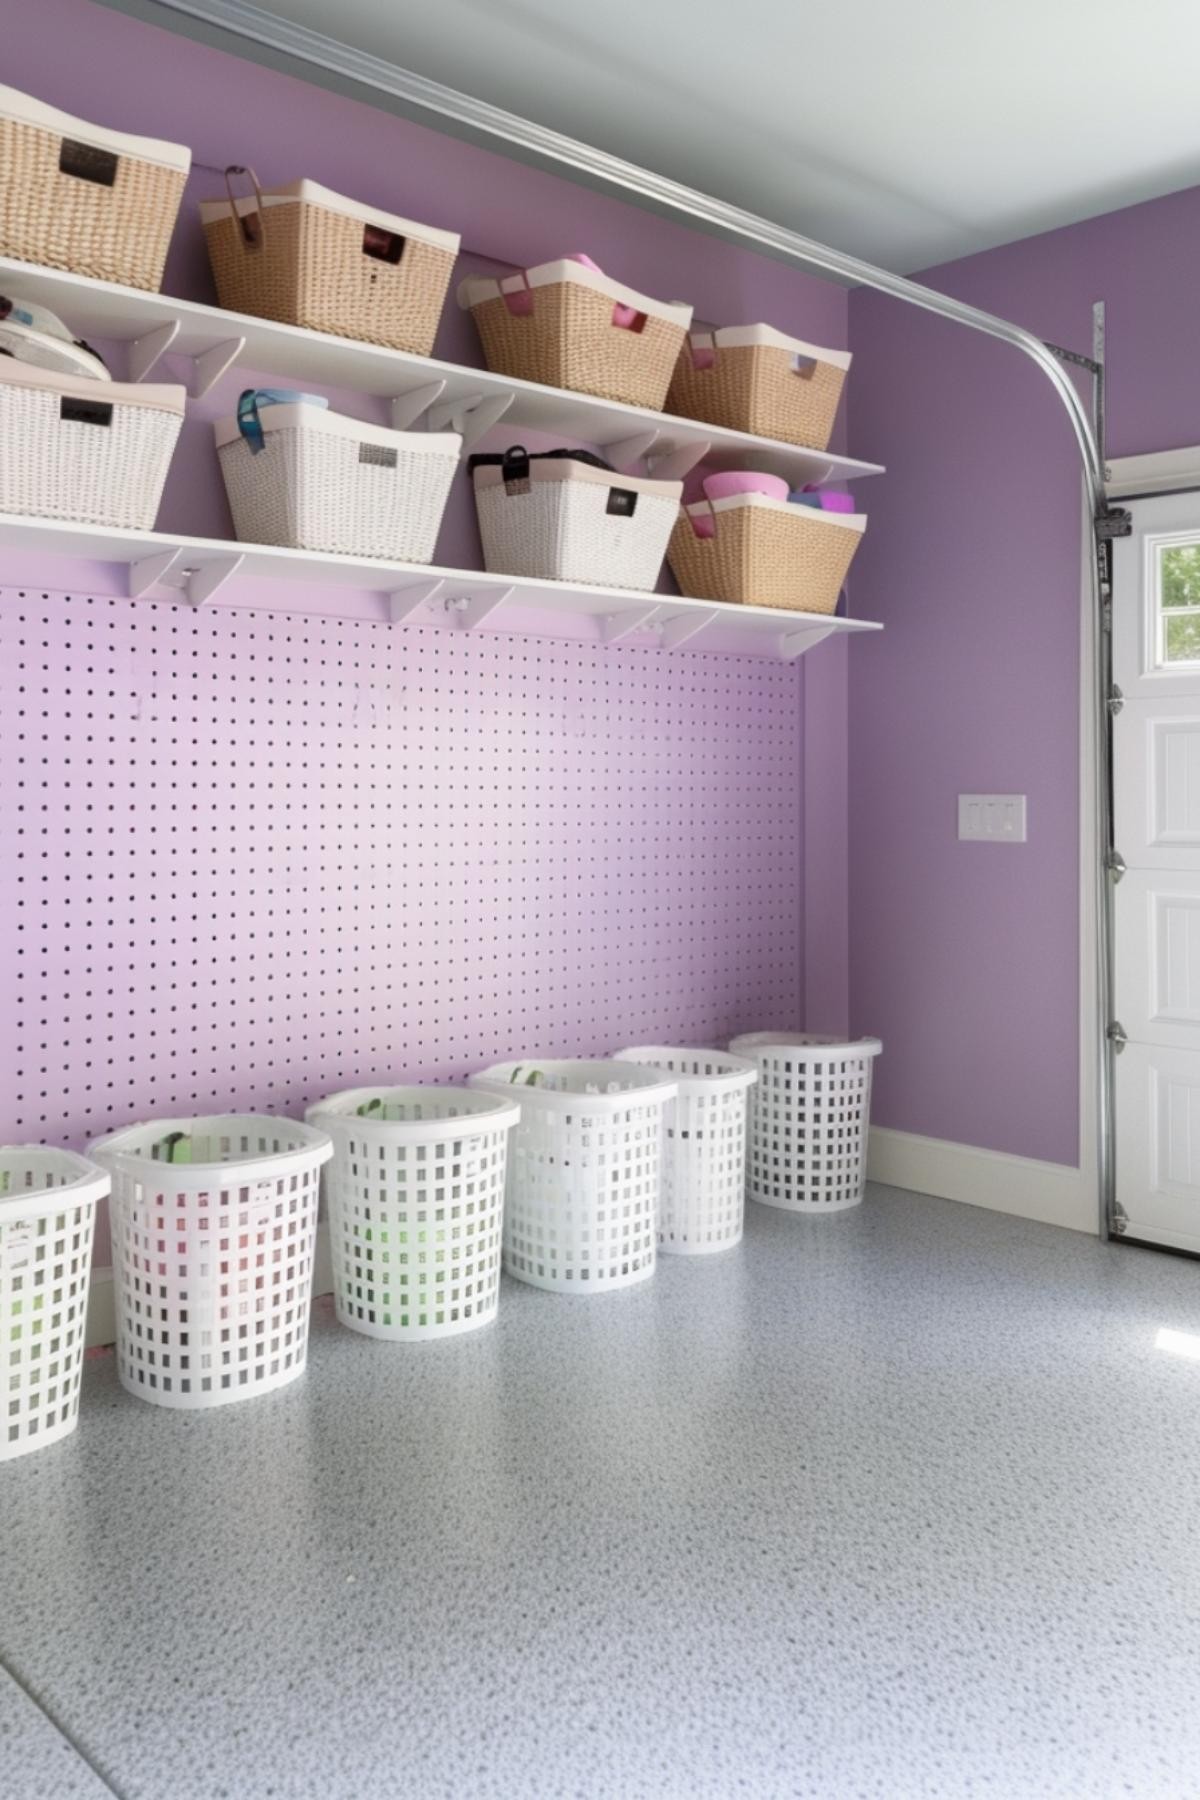 Lavender Walls With a Practical Pegboard